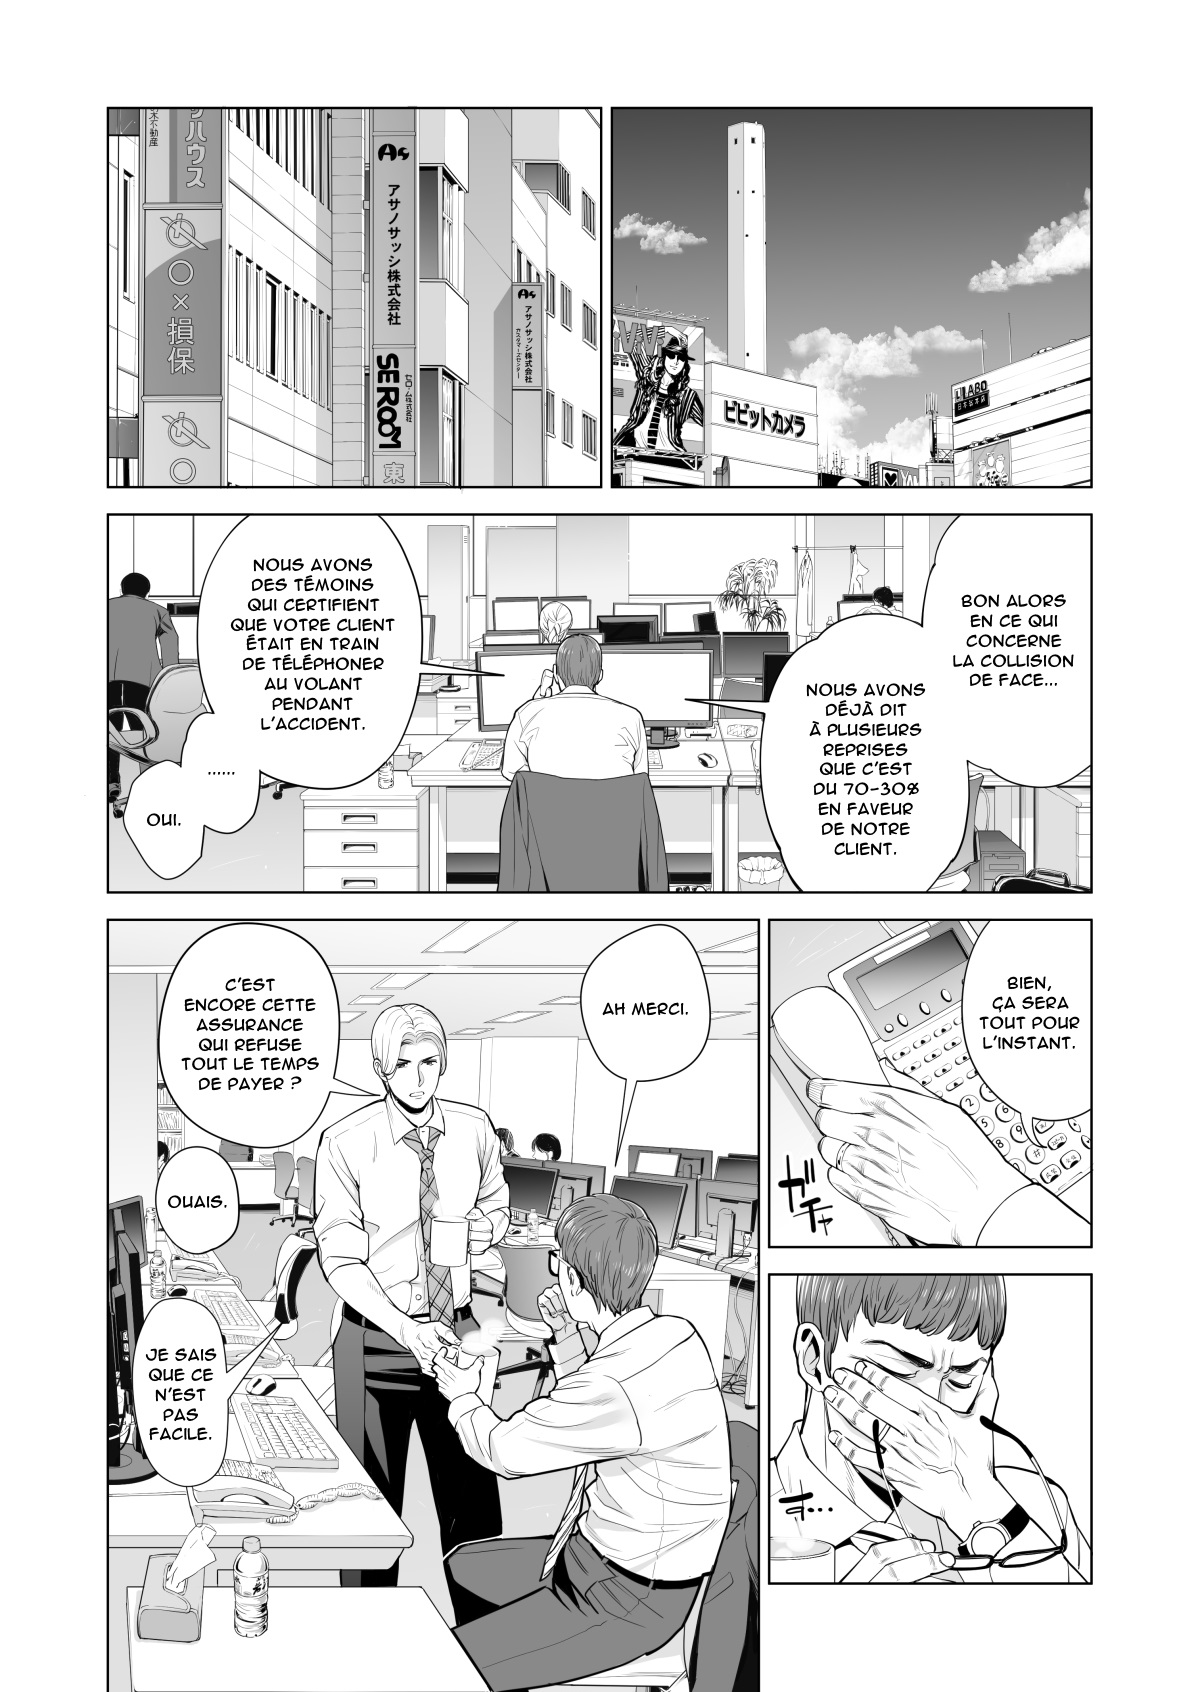 Tsukiyo no Midare Zake  Moonlit Intoxication ~ A Housewife Stolen by a Coworker Besides her Blackout Drunk Husband ~ Chapter 1 numero d'image 8